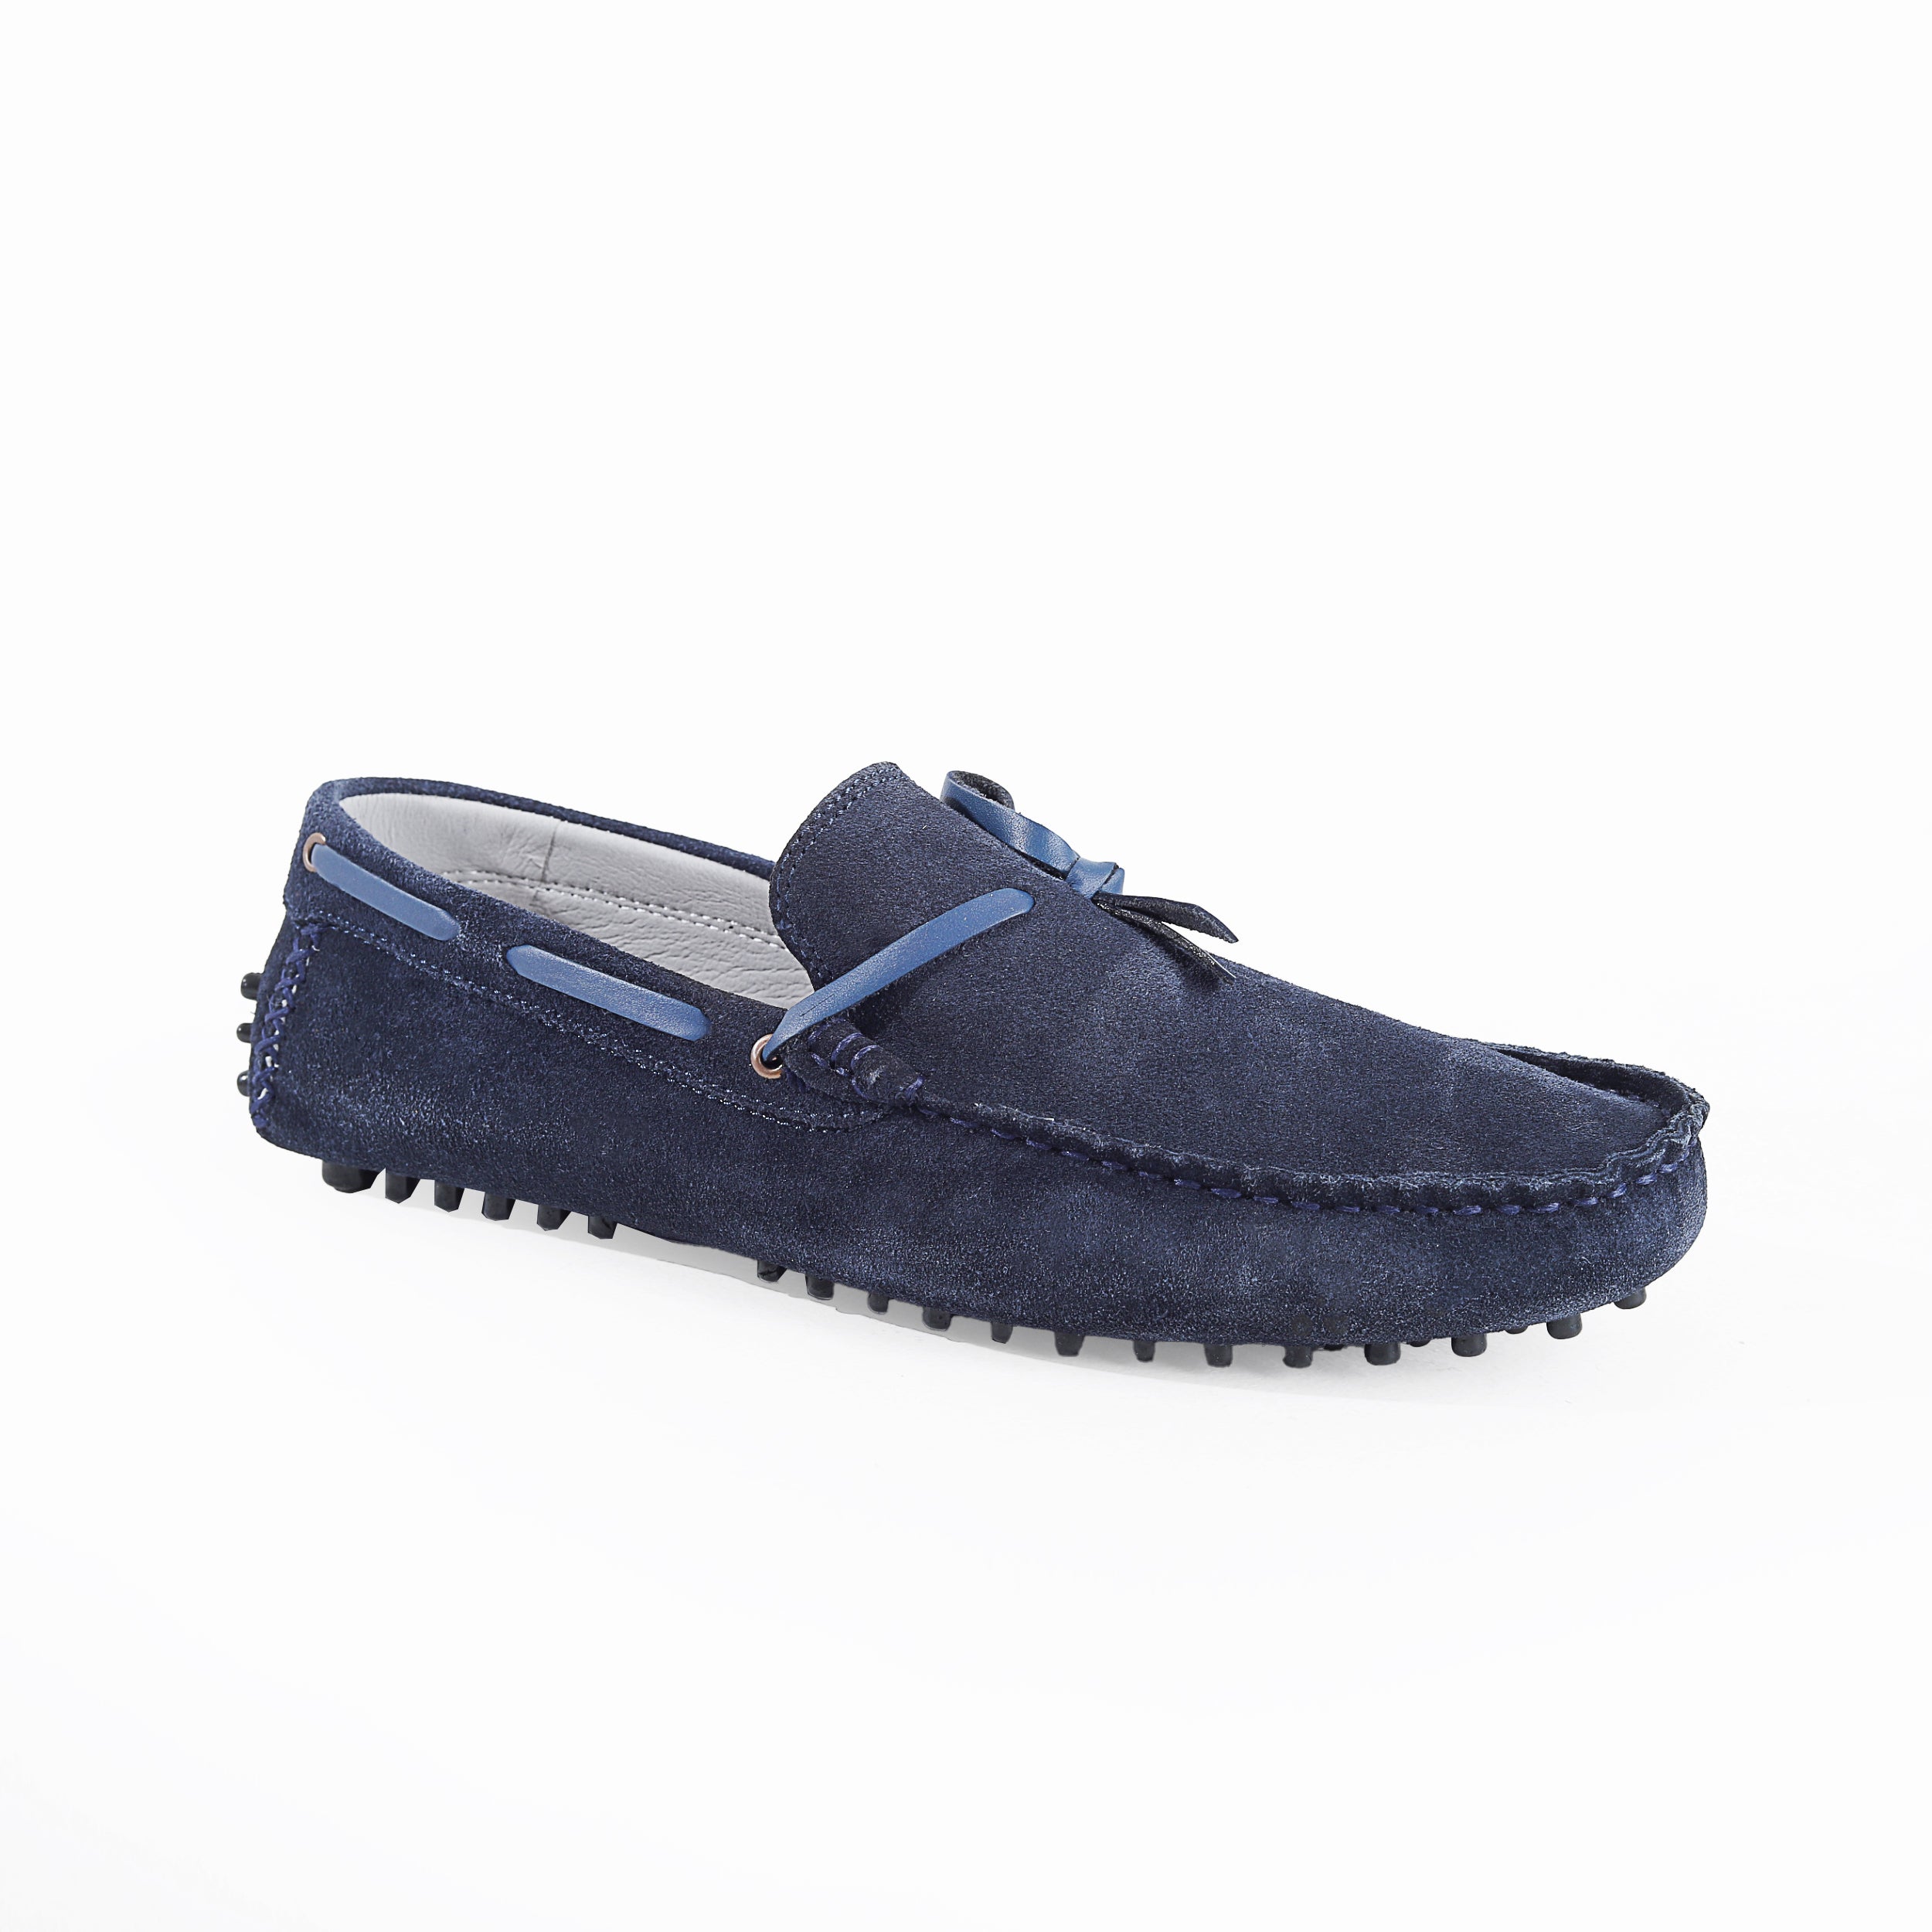 Hush Puppies Suede Loafers Shoes 4906